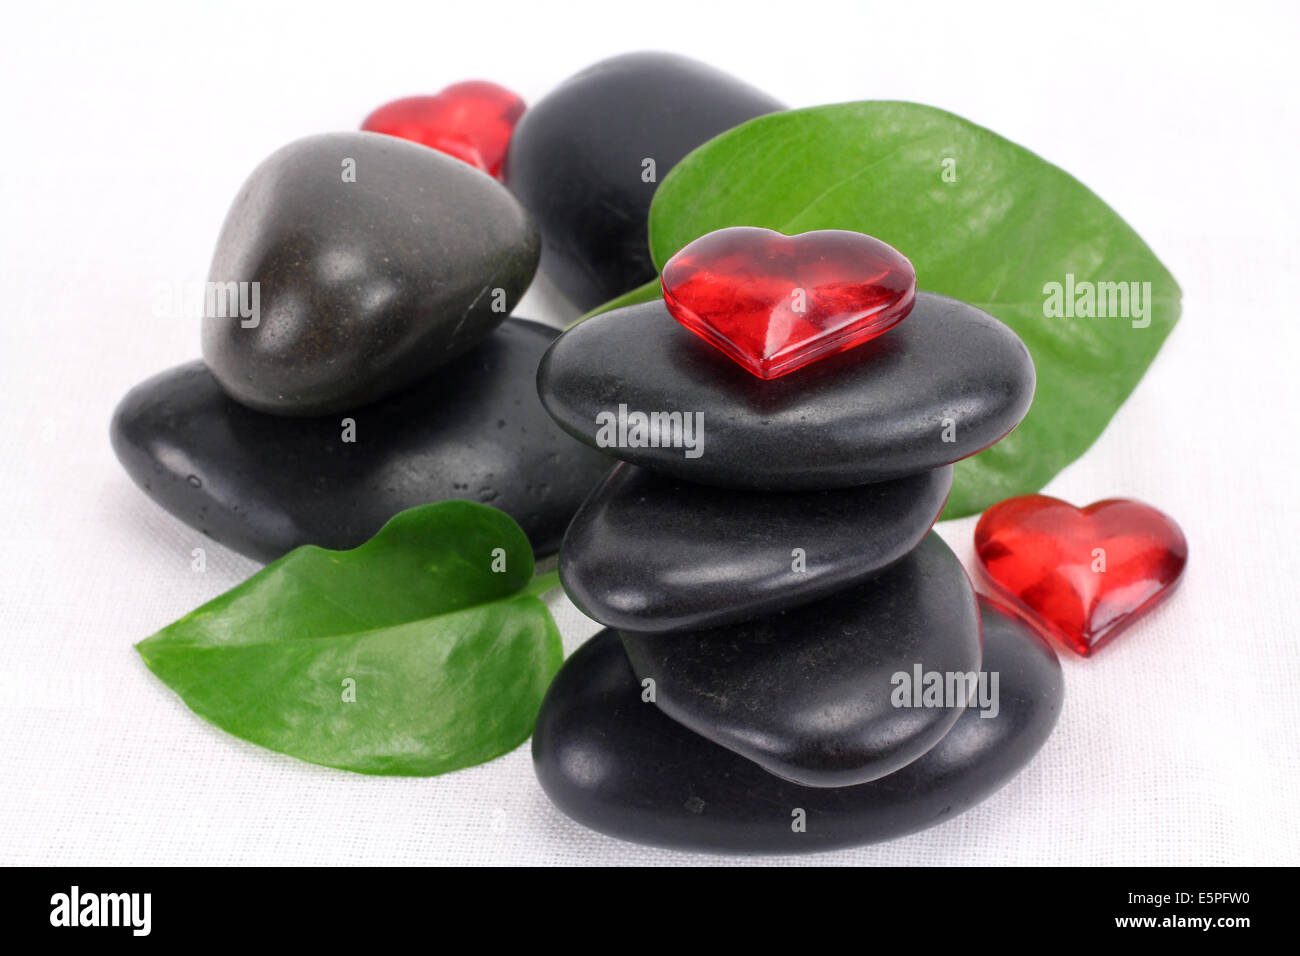 A pile of balanced black spa therapy stones Stock Photo